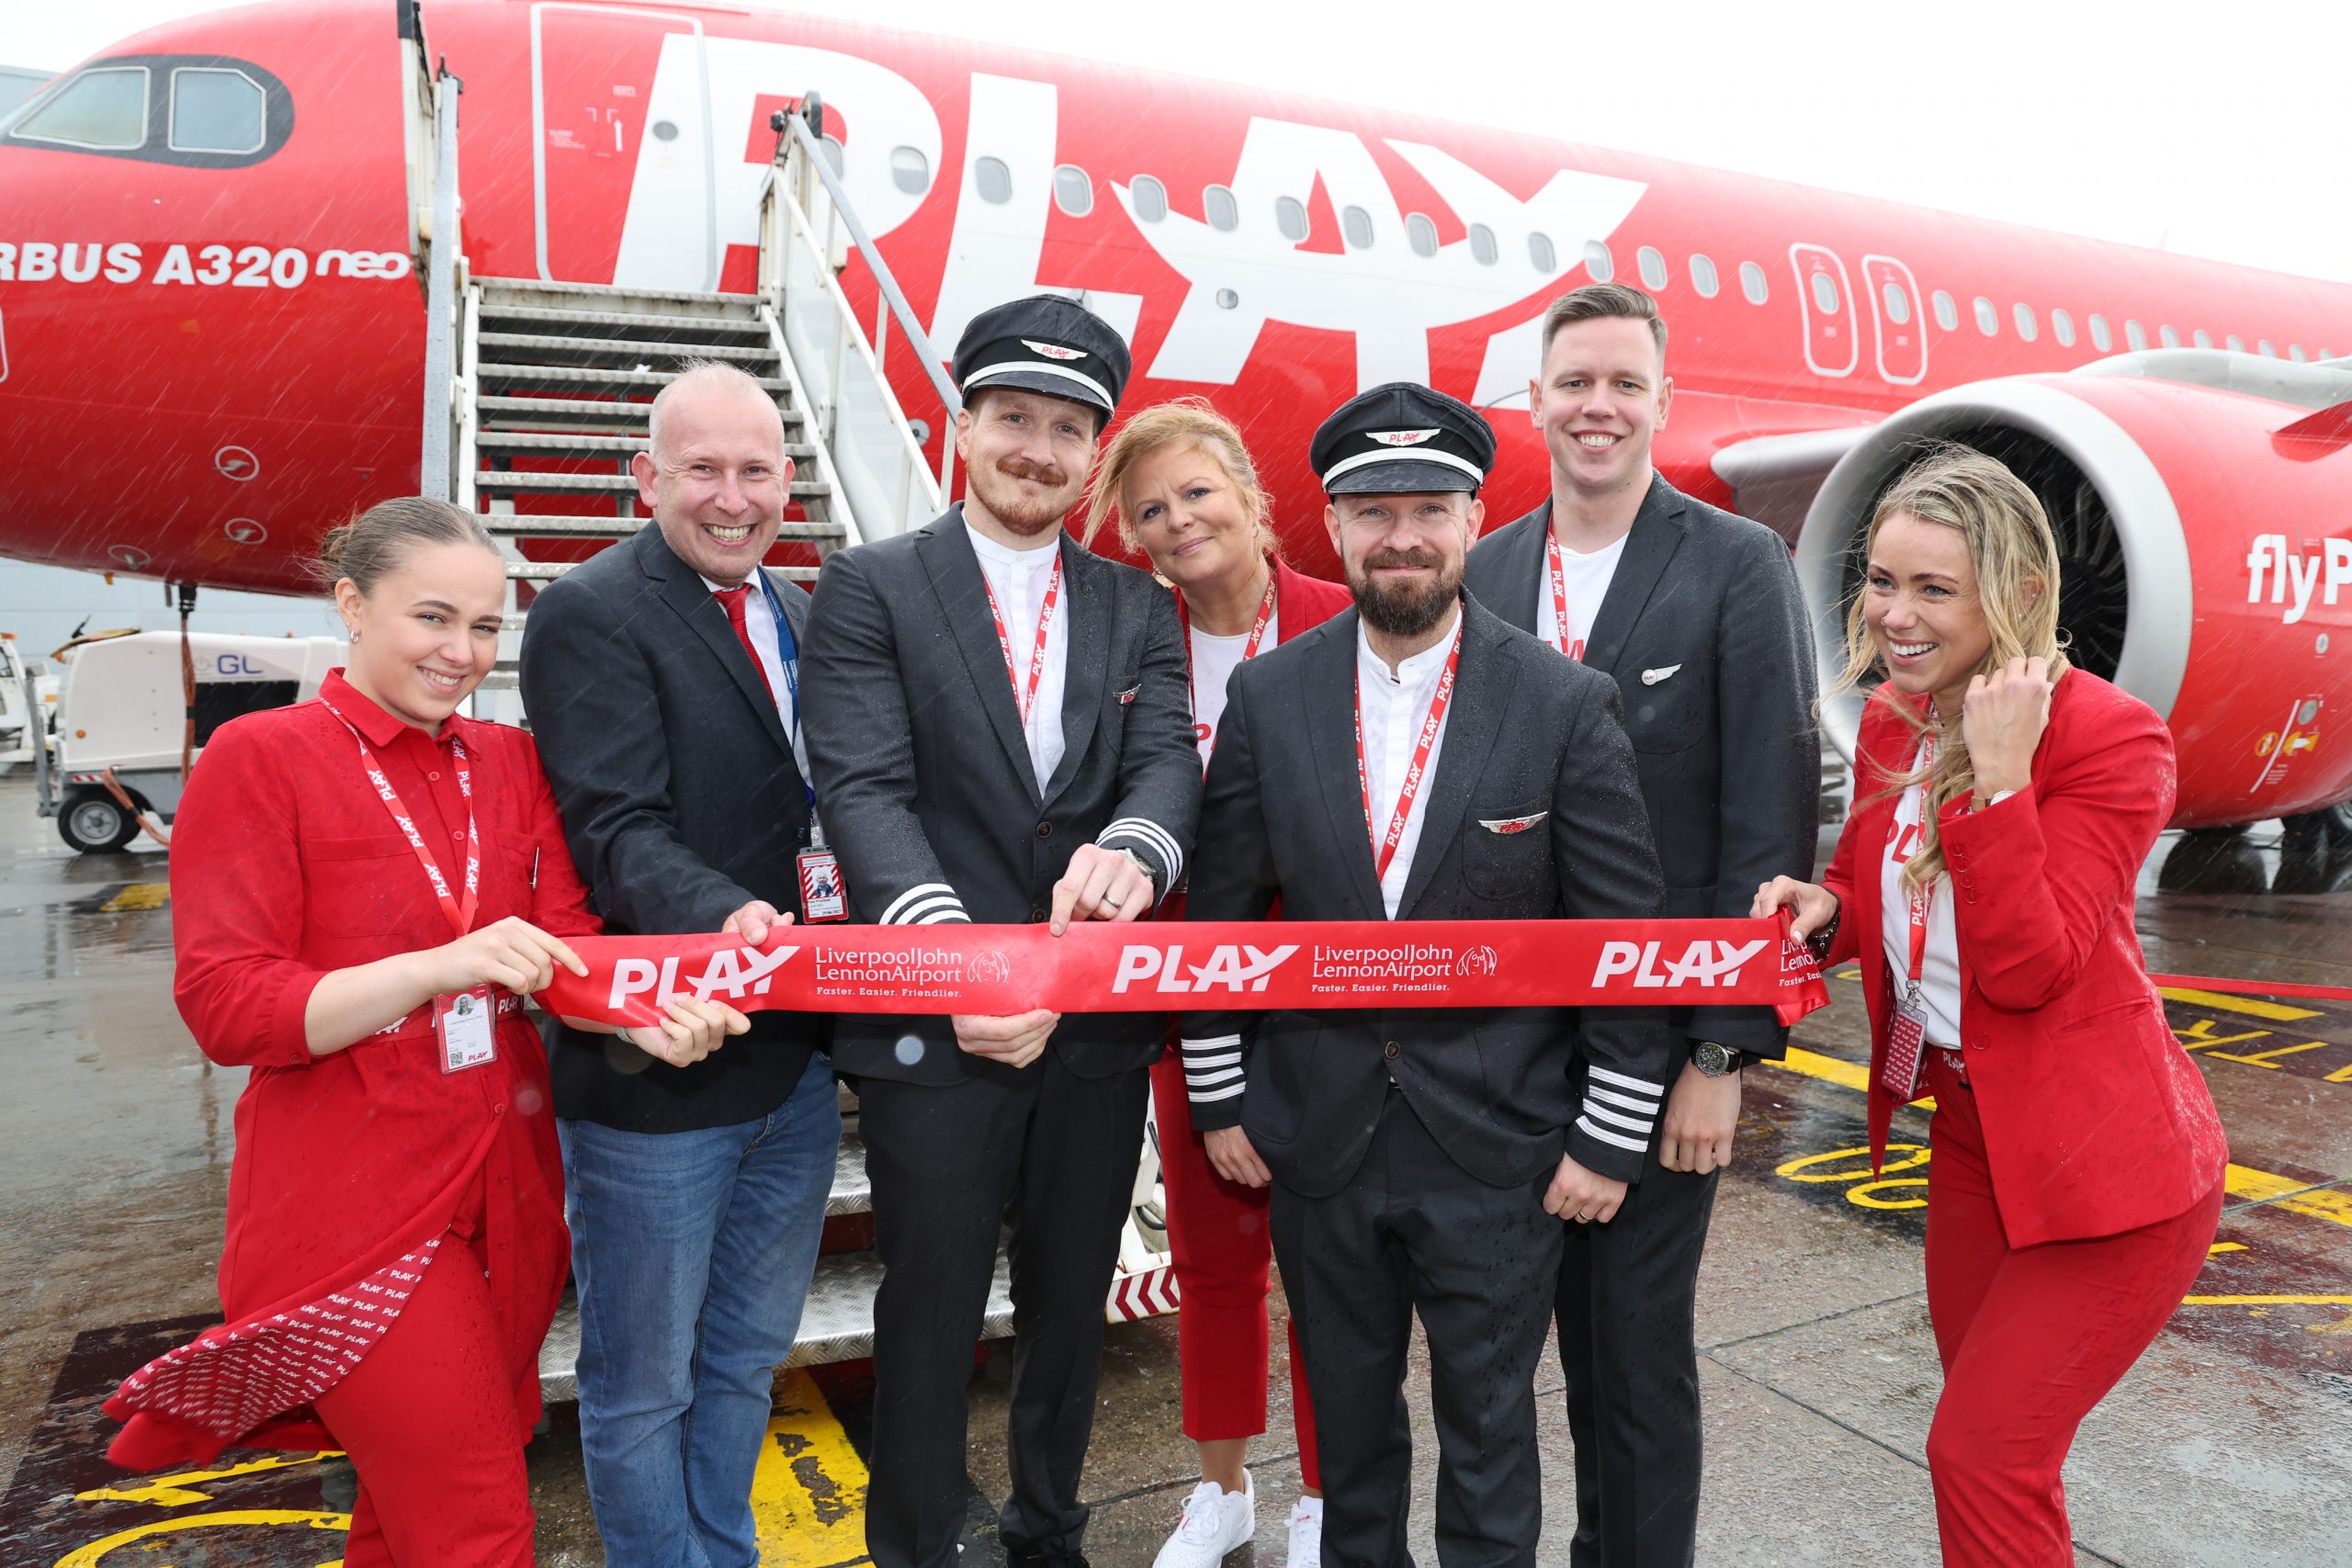 Seven people stood next to a red plane holding up a banner with Play on.